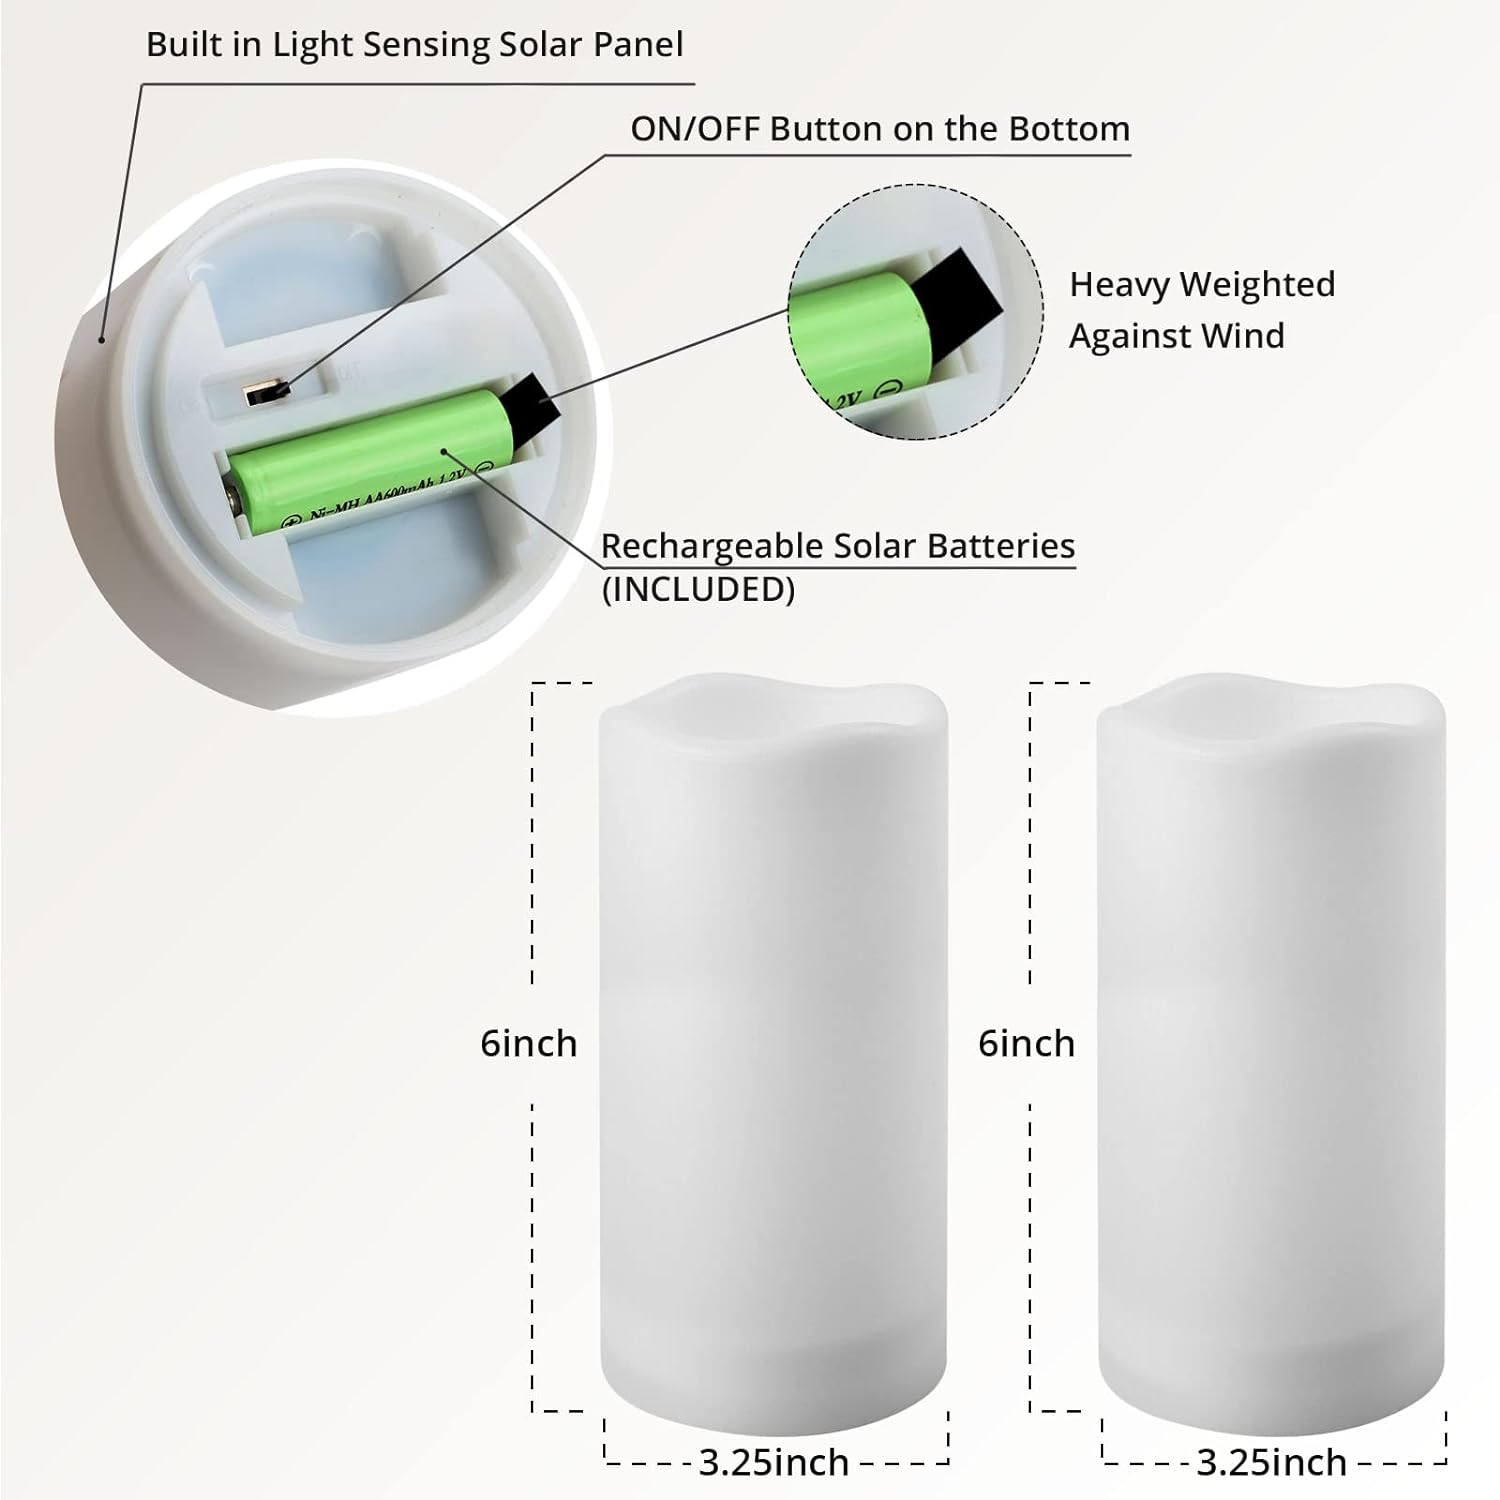 NURADA Large Outdoor Solar Powered Candles - Flameless Pillar Waterproof Rechargeable Candle Set, White Resin, LED Light, Rechargeable Solar Battery Included, Waterproof for Patio Decor 3.25" x 6"